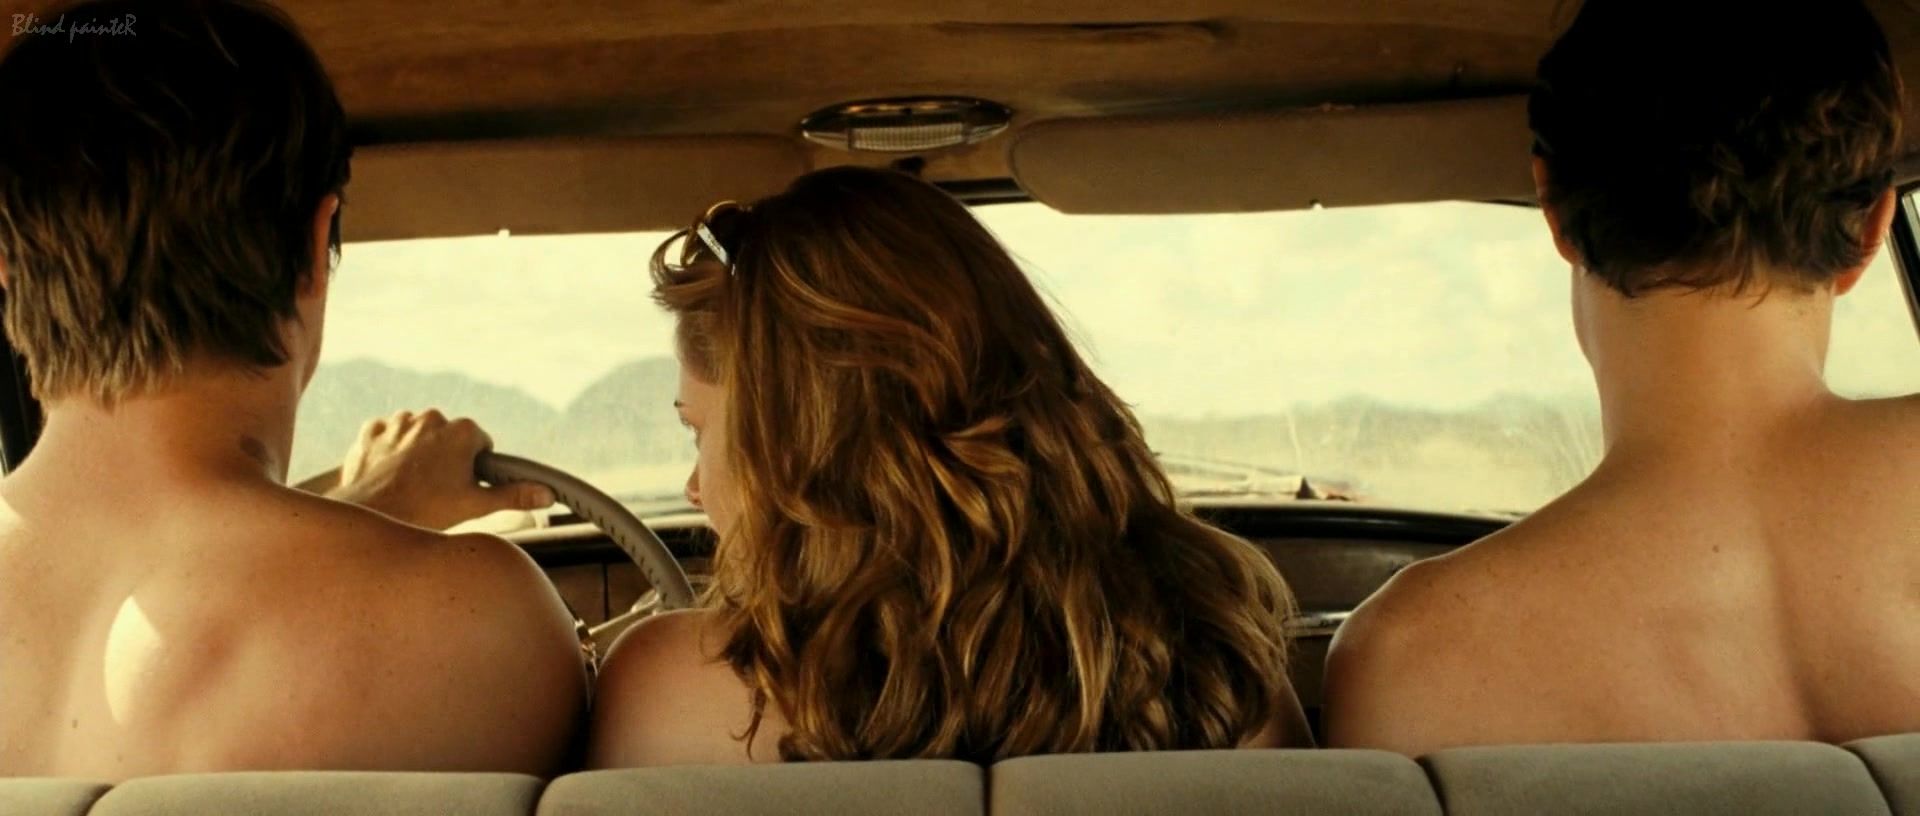 Pussy To Mouth Kristen Stewart nude - On The Road S1E1 Facial - 1